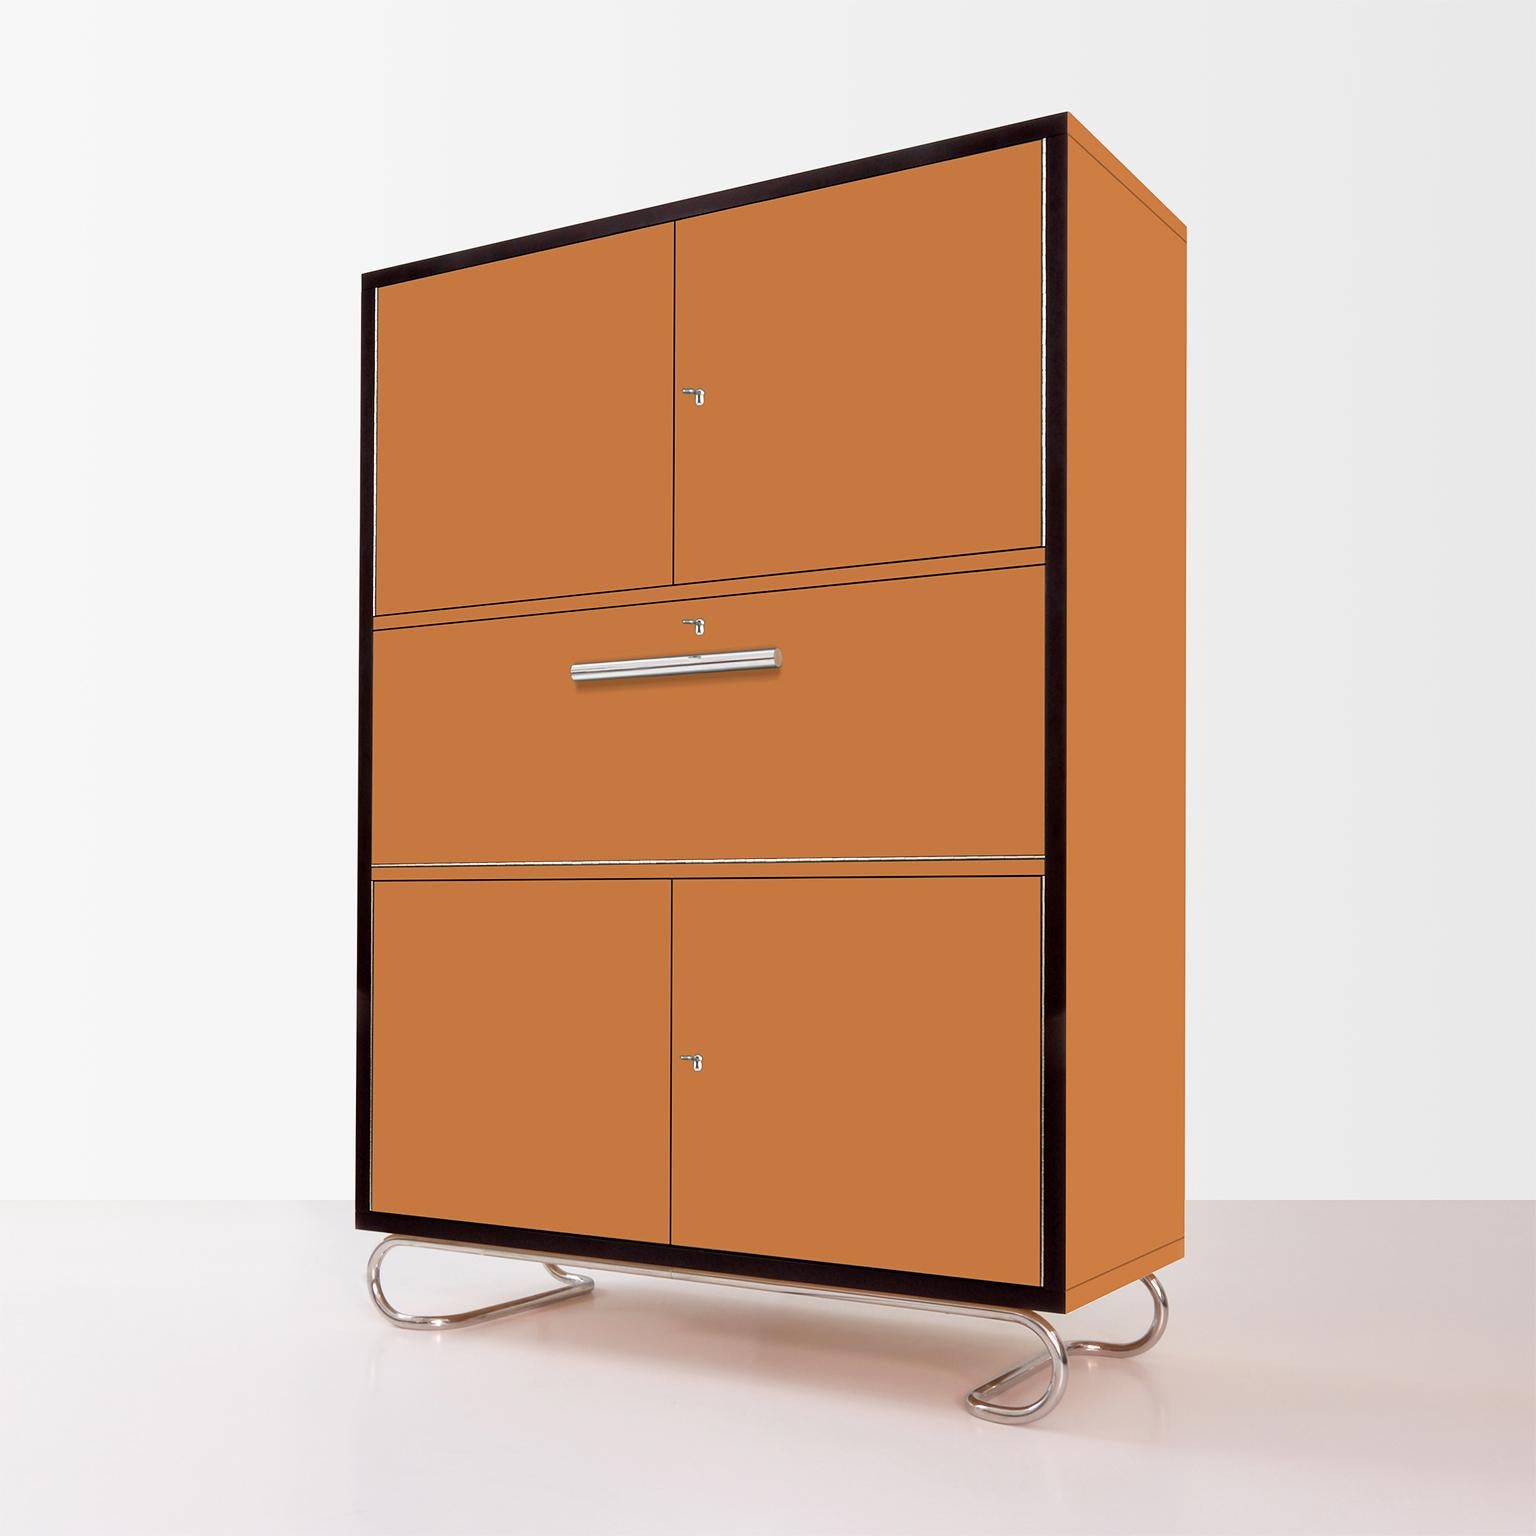 German modernism free-standing secretary cabinet designed and manufactured by GMD Berlin. Wood lacquering in various colors and finish. Available on request in different amounts.